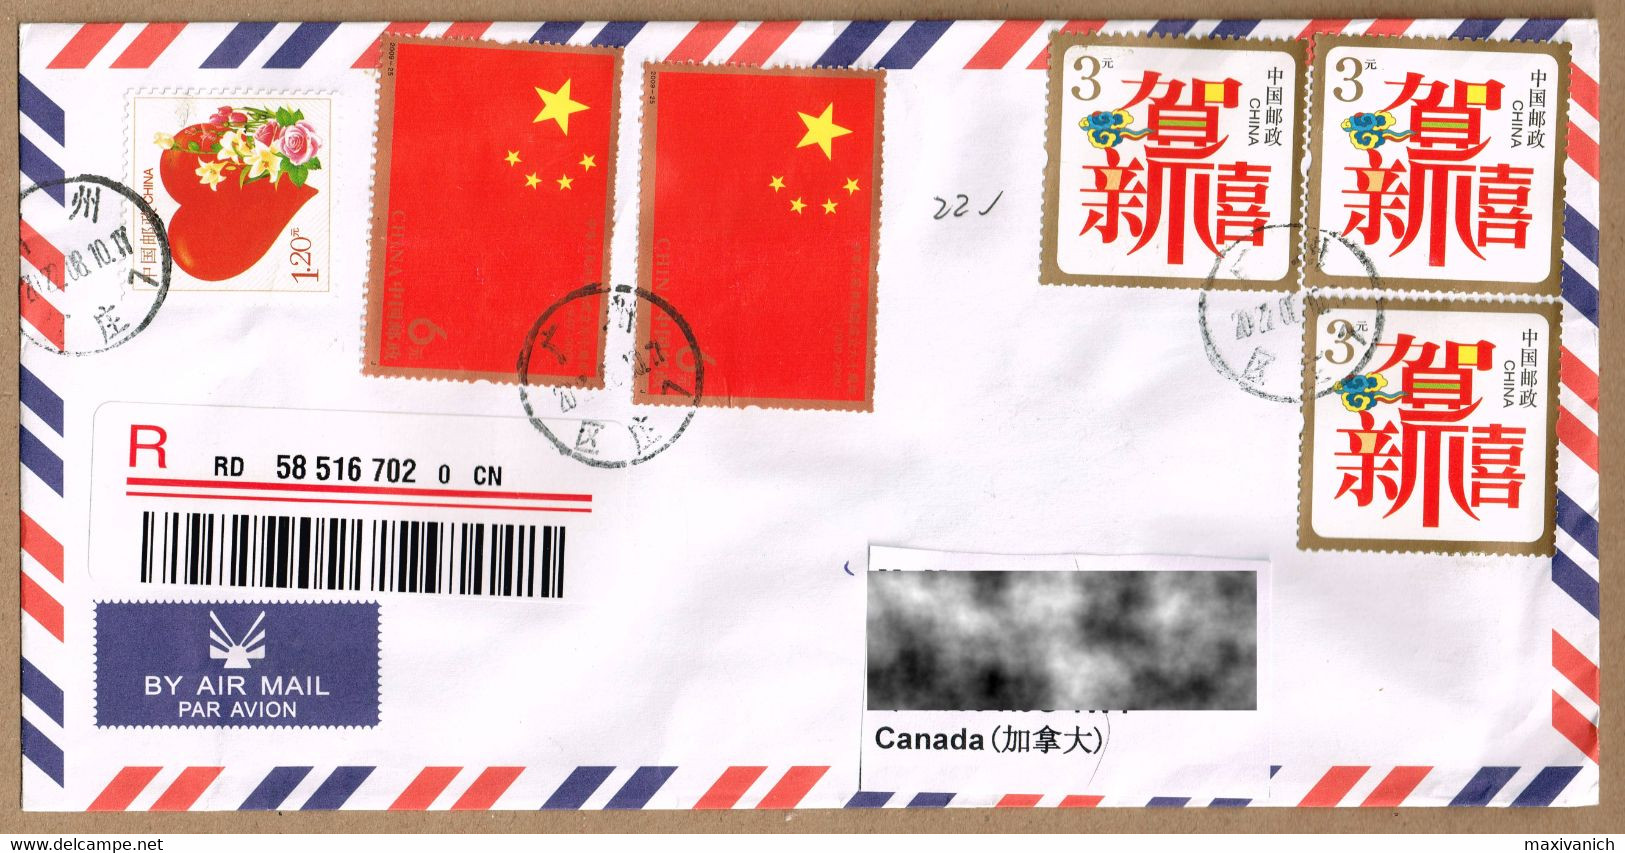 China 2009 60th Anniversary Founding 2010 Happy New Year 2013 Hearts & Flowers Cover To Canada - Usados